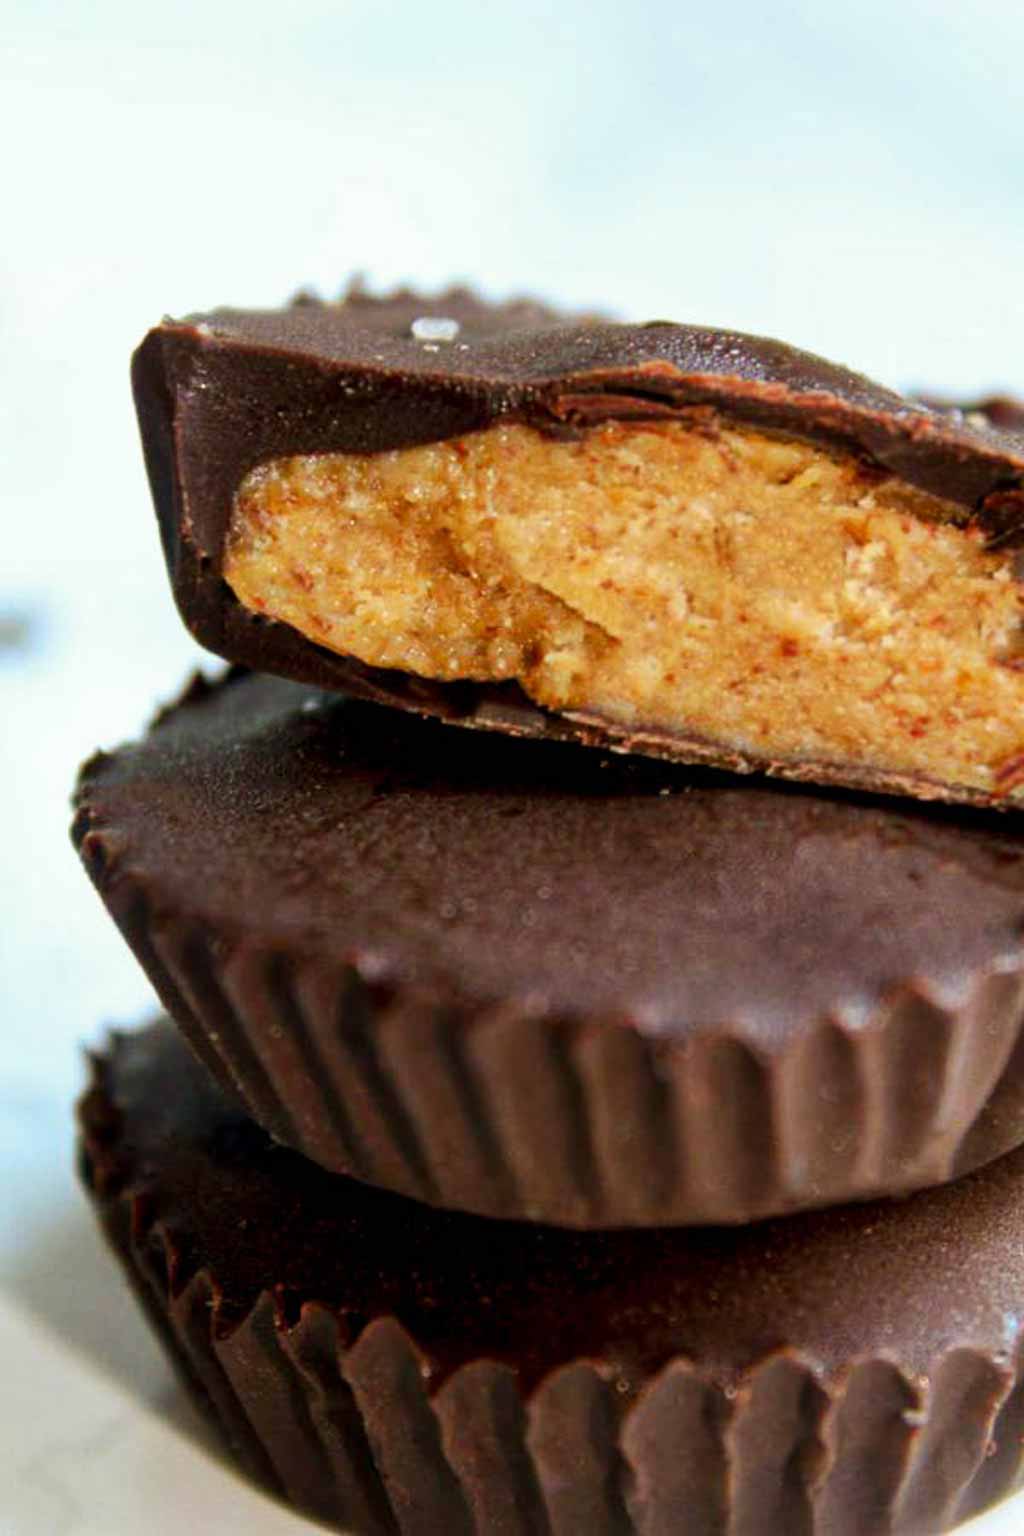 Stacked Peanut Butter Cups With The Top One Showing The Filling In The Middle